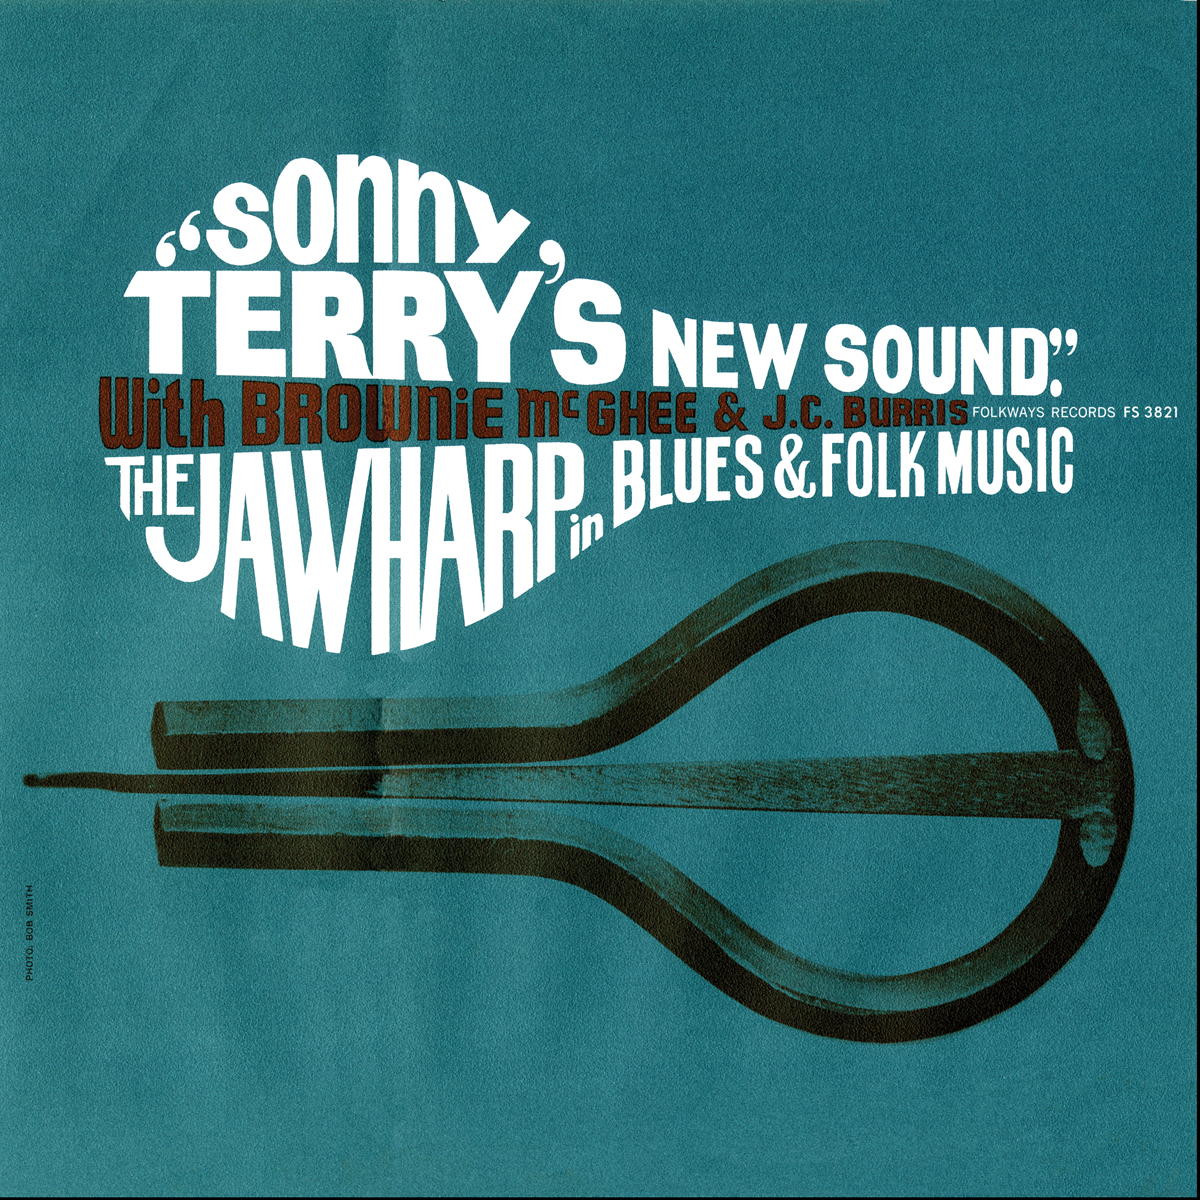 SONNY TERRY'S NEW SOUND: JAWHARP IN BLUES & FOLK